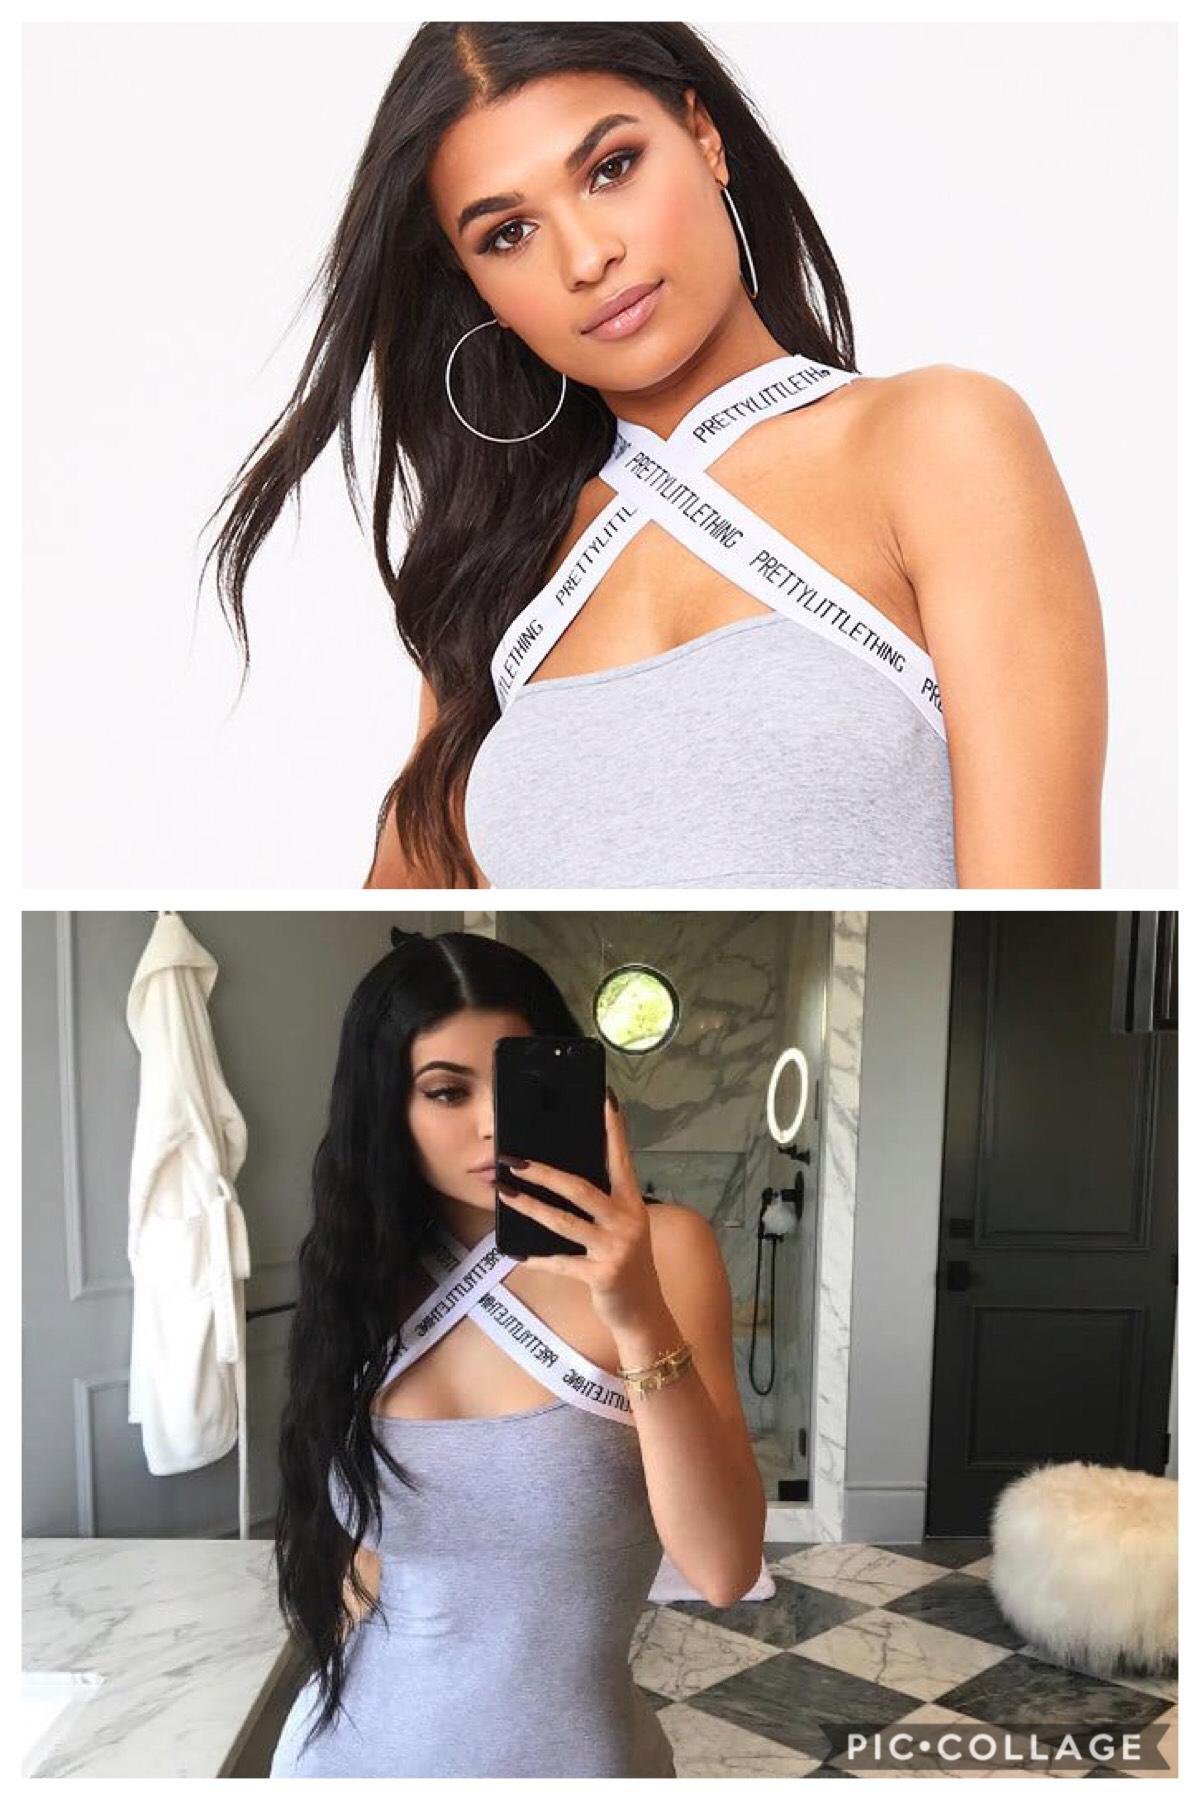 The first one is me and the second one is kylie Jenner which pic looks better ?